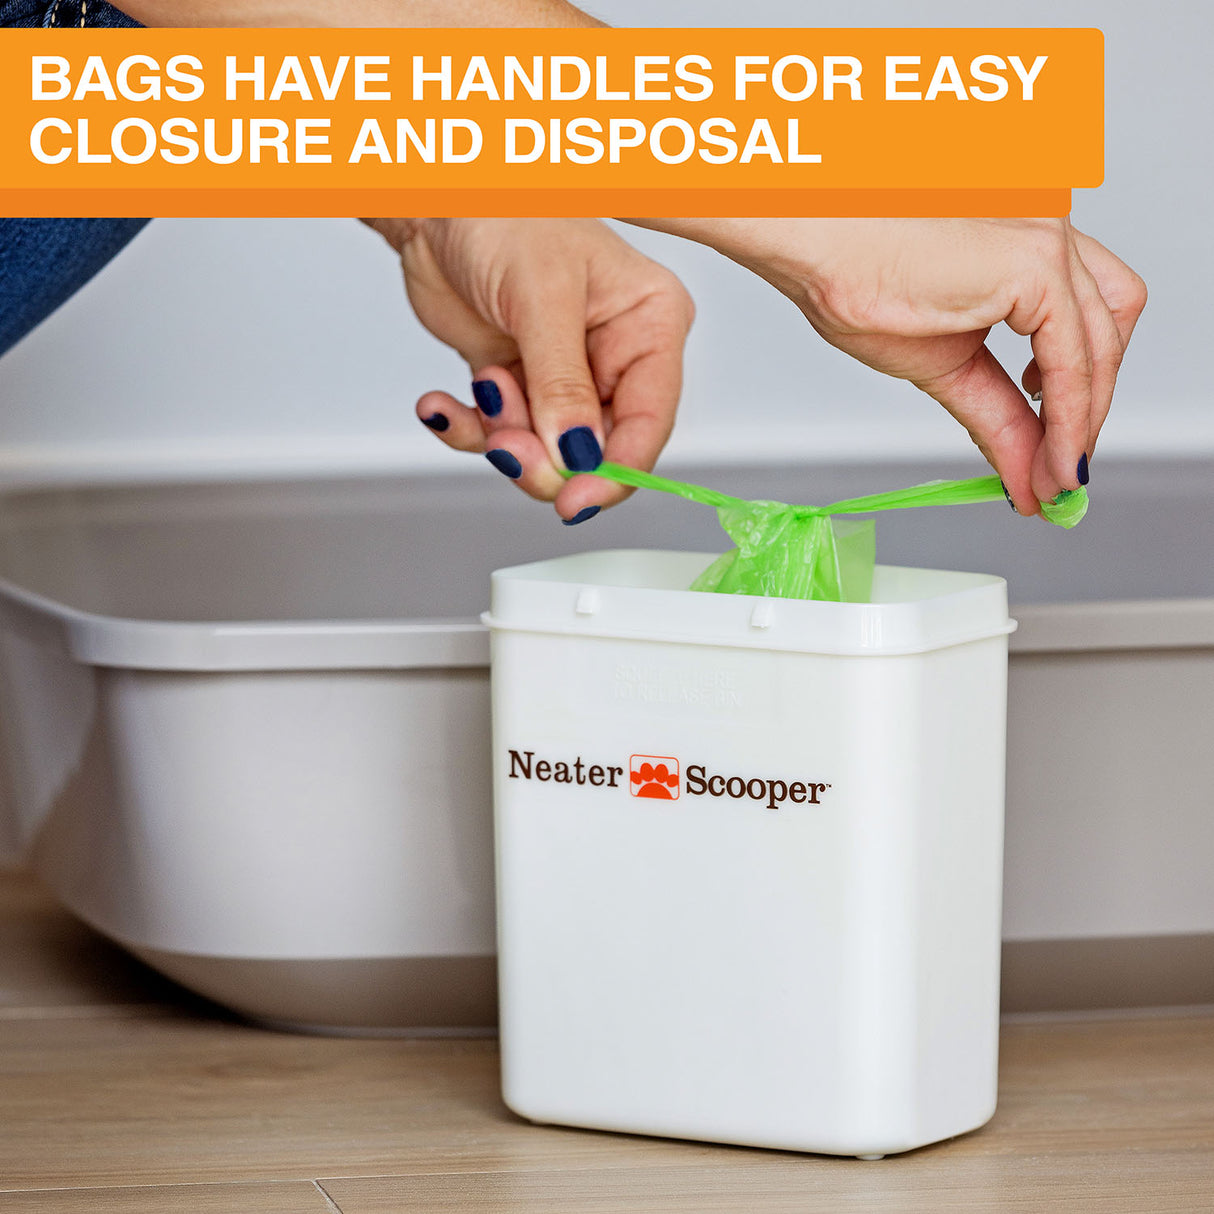 Neater Scooper bags have handles for easy closure and disposal